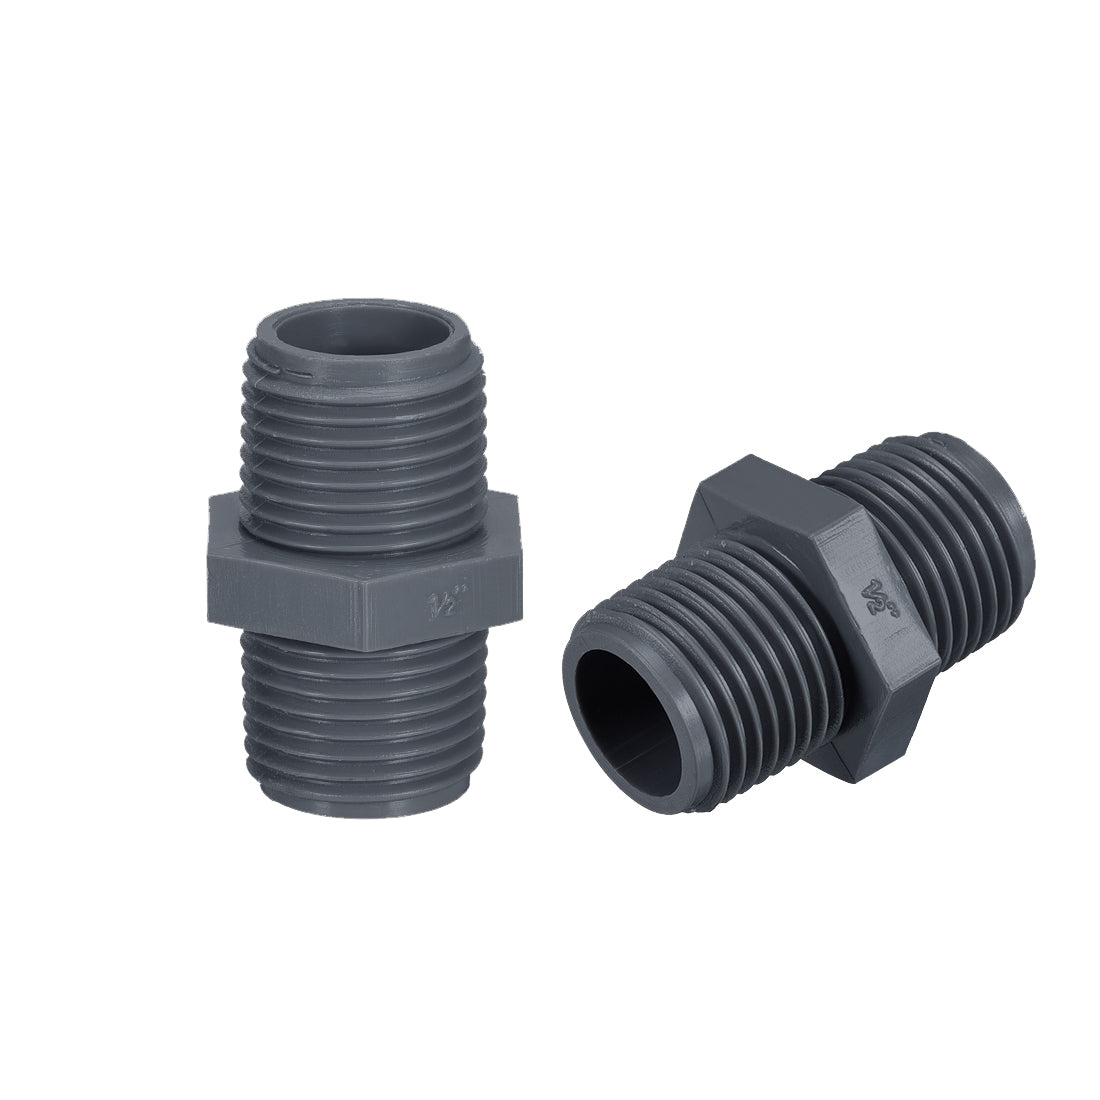 uxcell Uxcell Pipe Fittings Connector G1/2xG1/2 Male Thread Adapter Plastic Hex Connector 10pcs